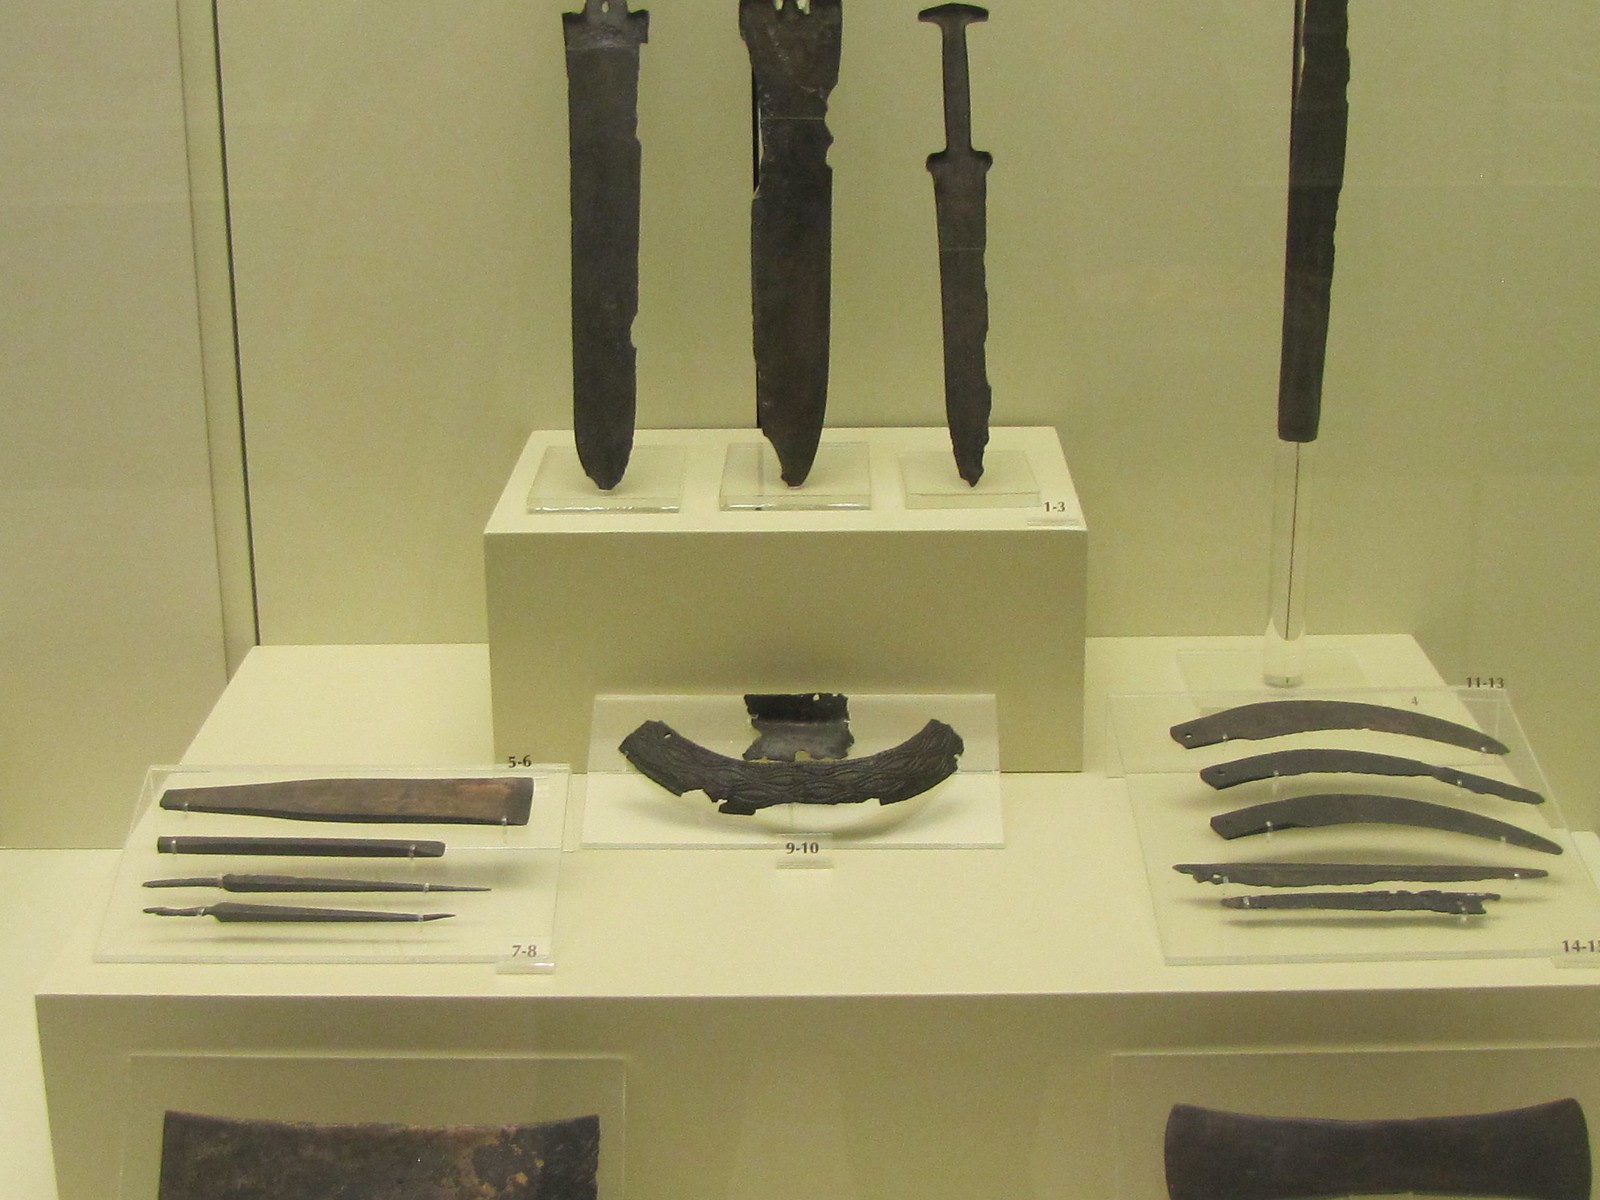 Iron swords and tools